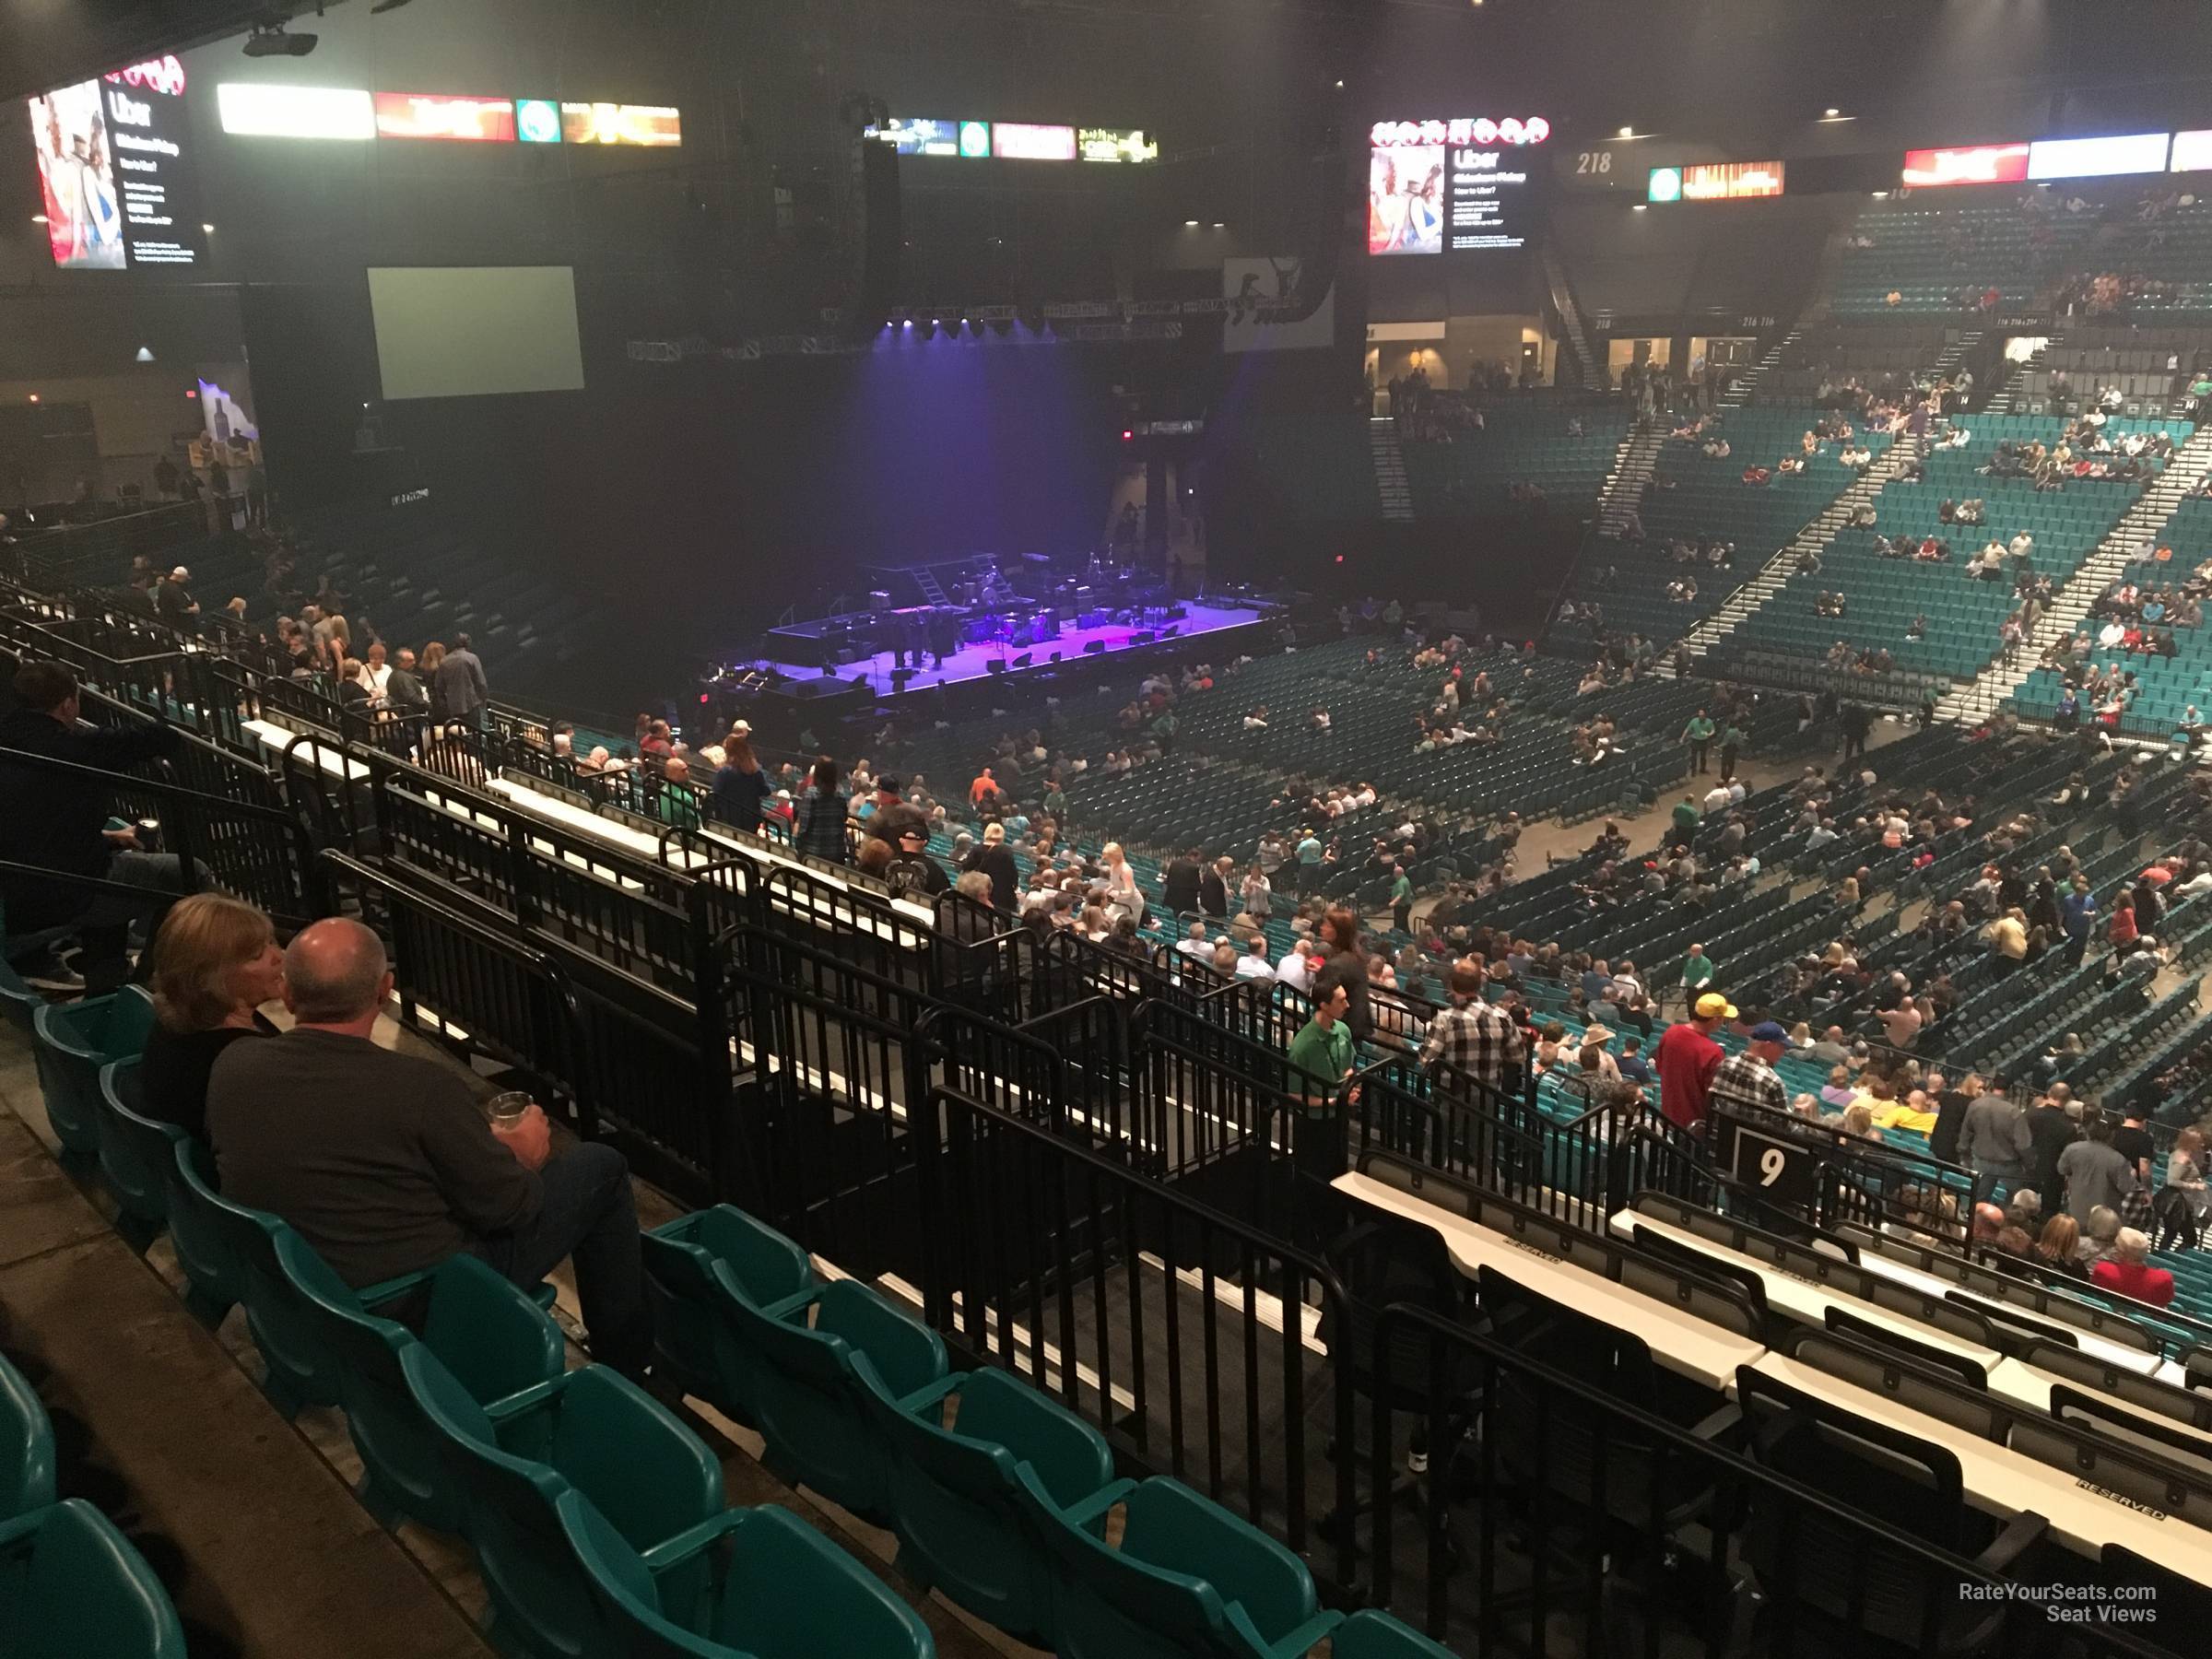 Mgm Grand Garden Arena Section 209 Rateyourseats Com